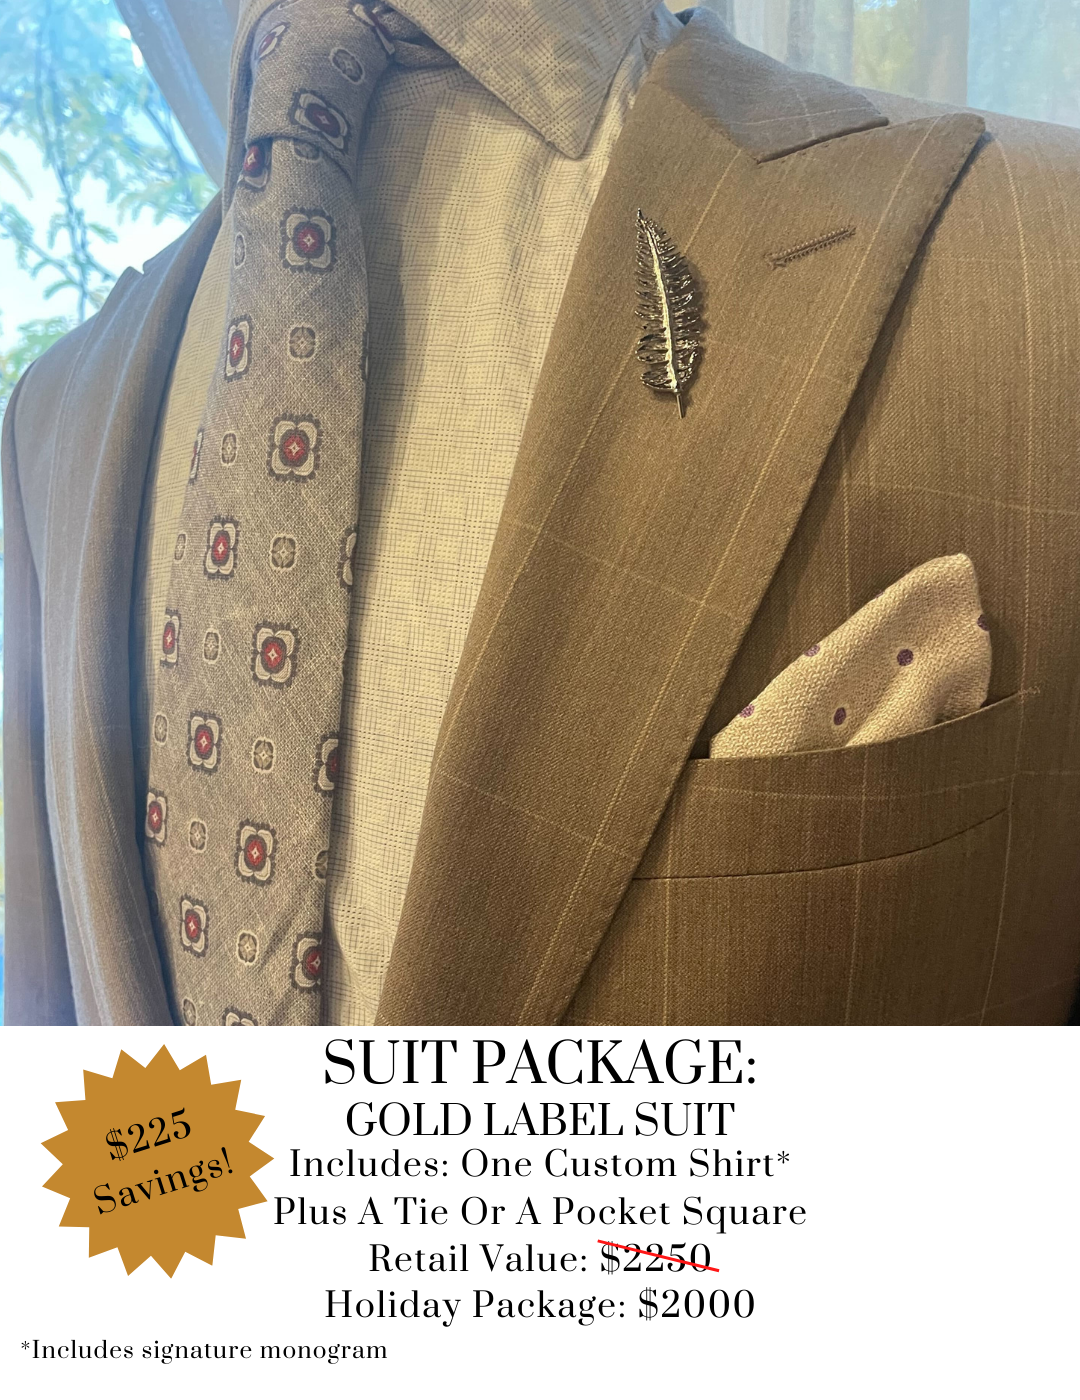 Suit Package